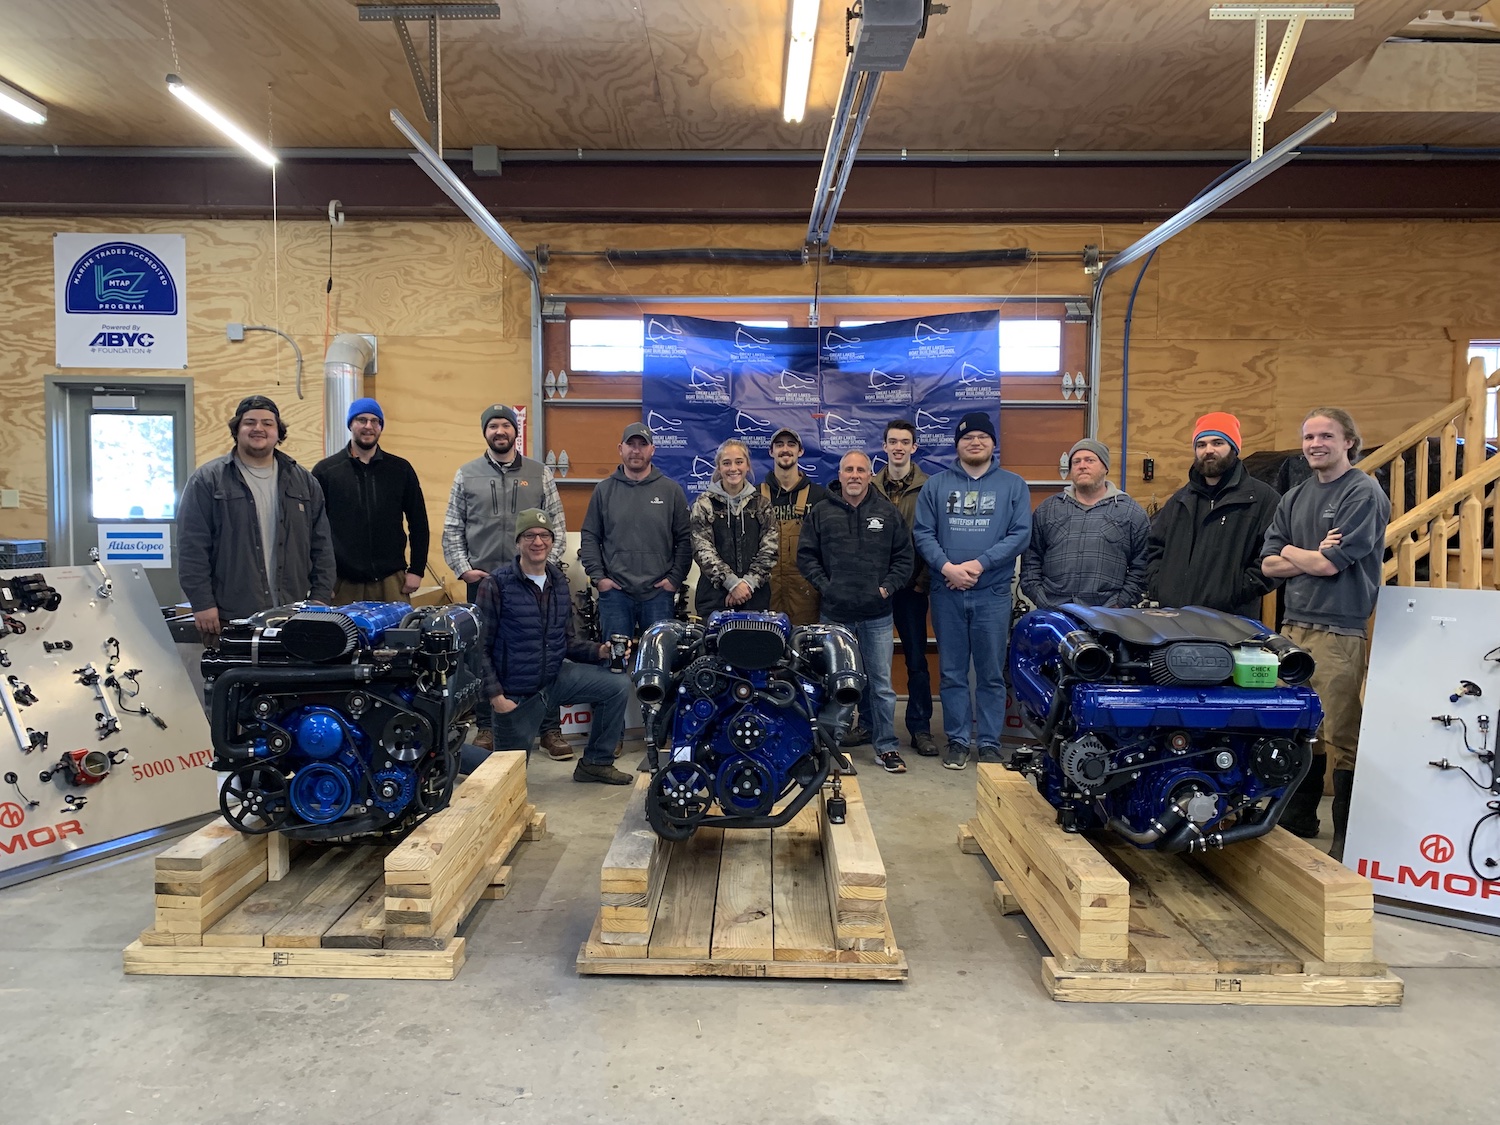 Ilmor Delivers “Truckload of Support” to Great Lakes Boat Building School